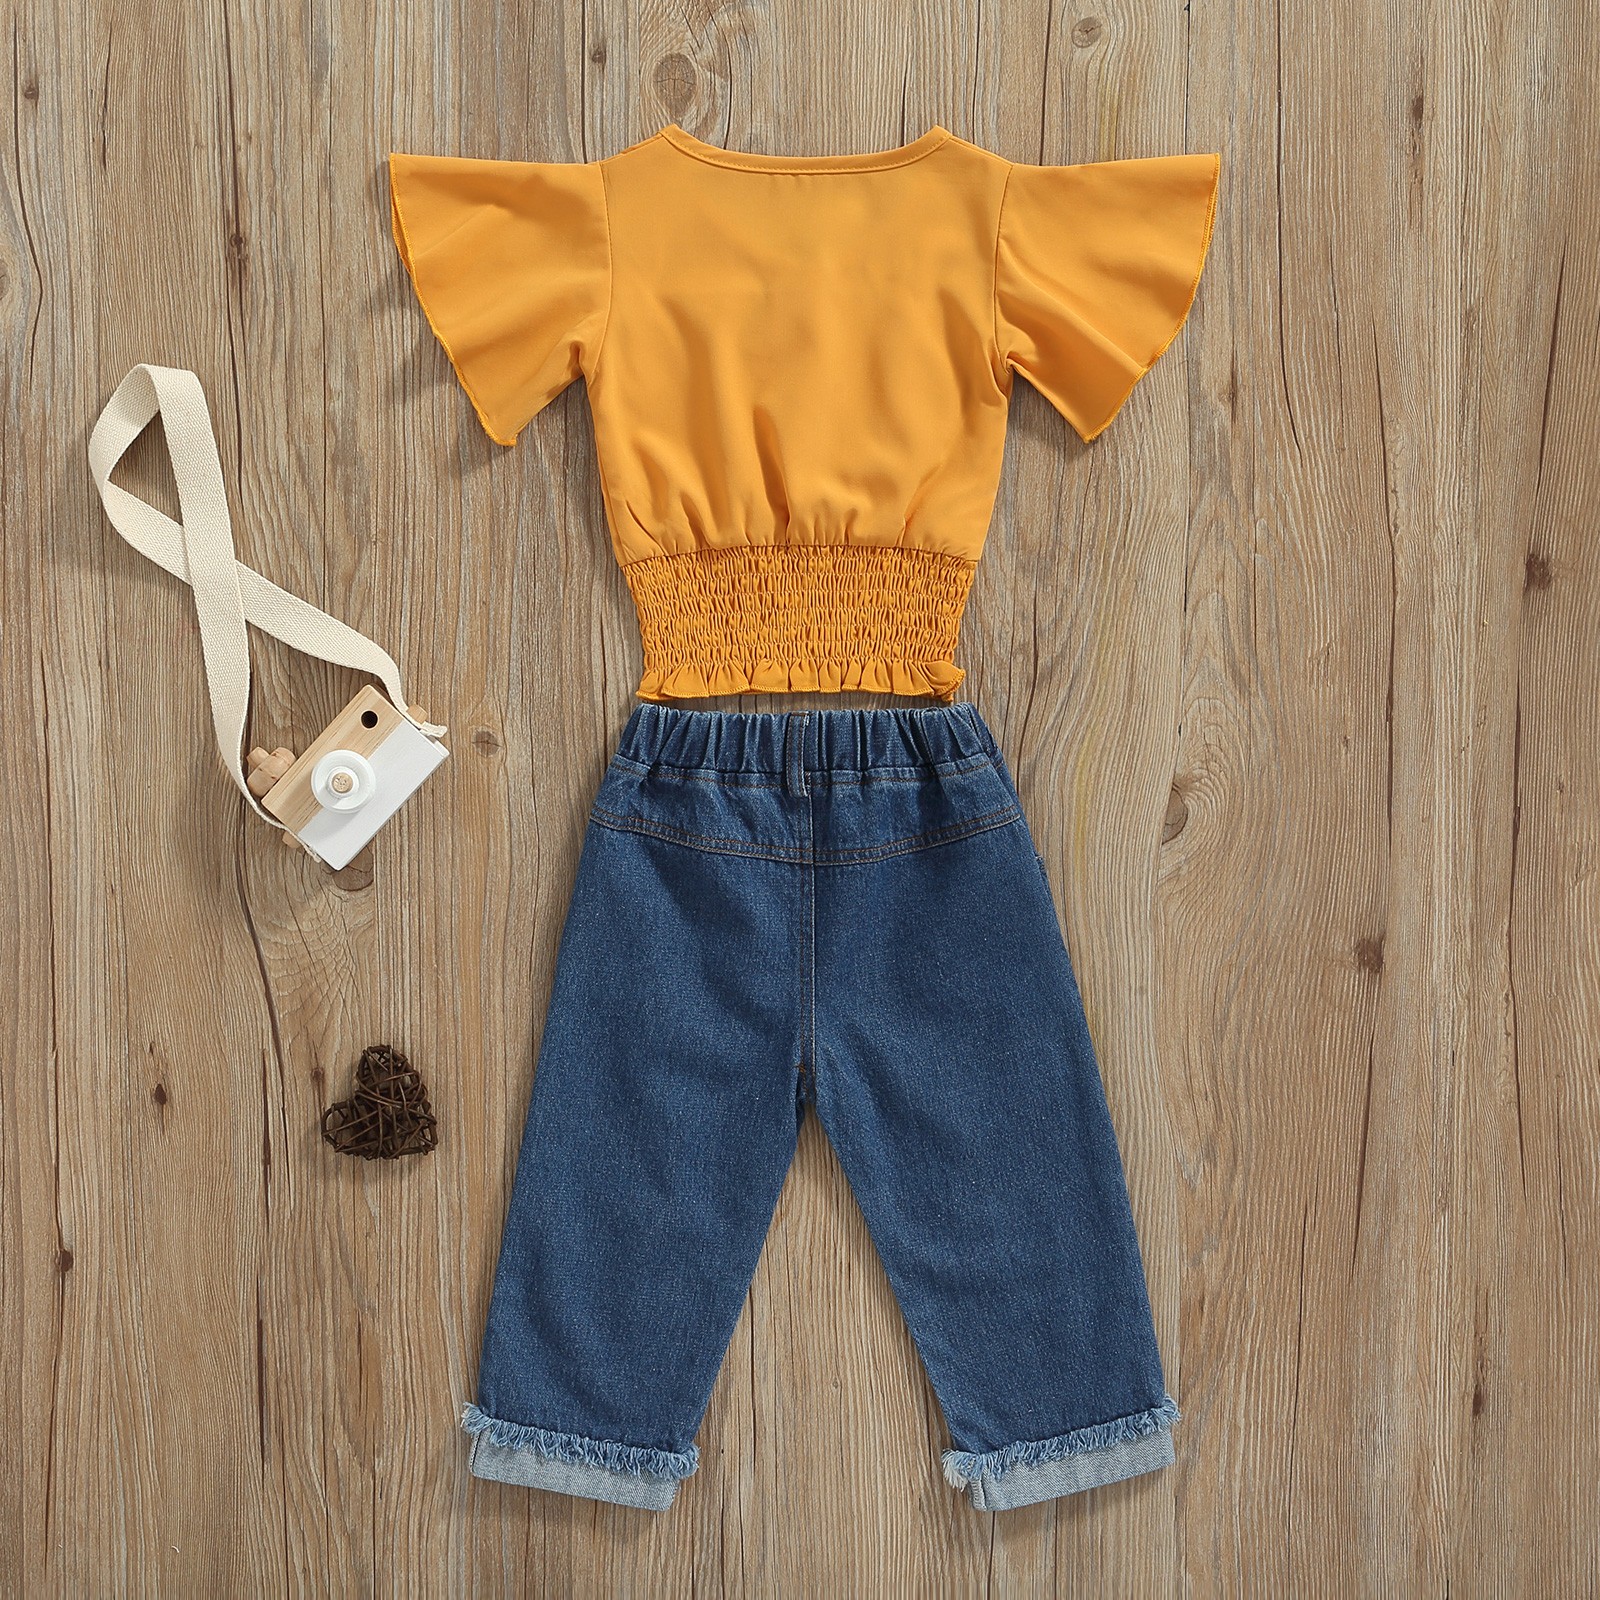 Ma & Baby 1-6Y Baby Boy Girls Clothes Set Ruffle Button V-Neck Denim Tops Pants Outfits Costumes D01